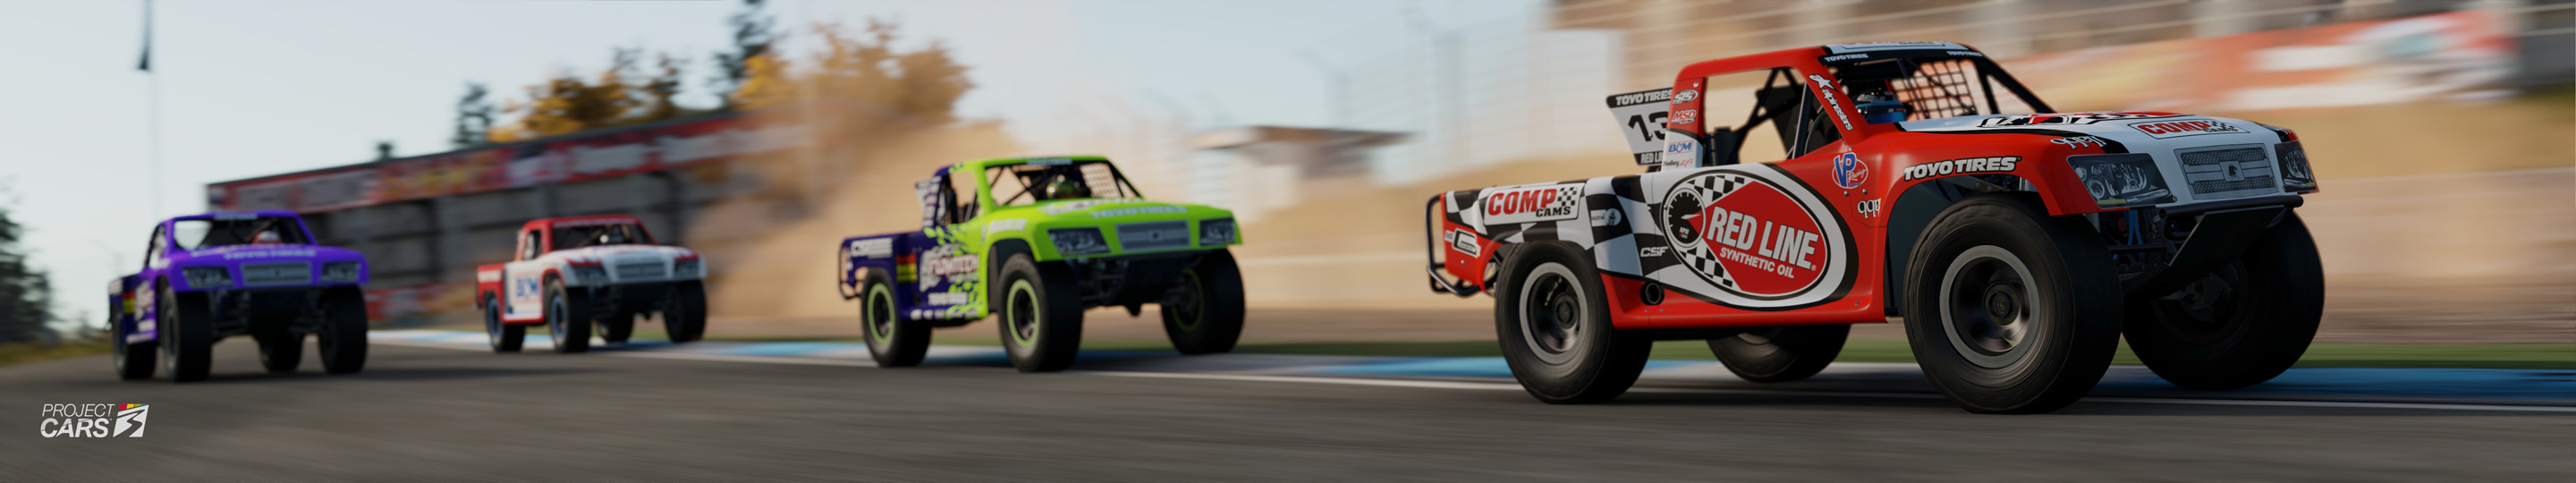 1 PROJECT CARS 3 SUPER TRUCK at KNOCKHILL copy.jpg